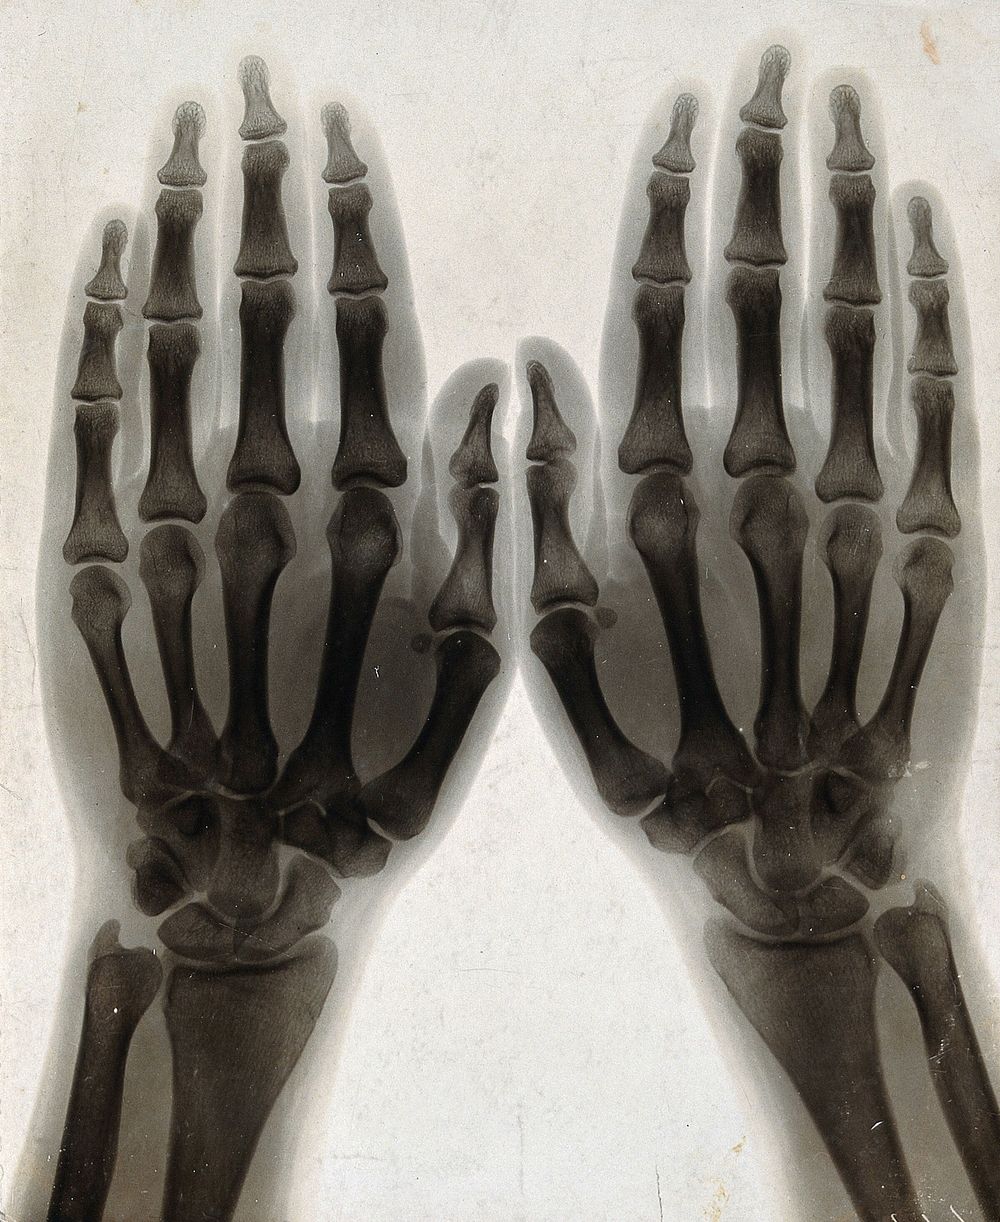 Two hands, viewed through x-ray. Photoprint from radiograph after Sir Arthur Schuster, 1896.